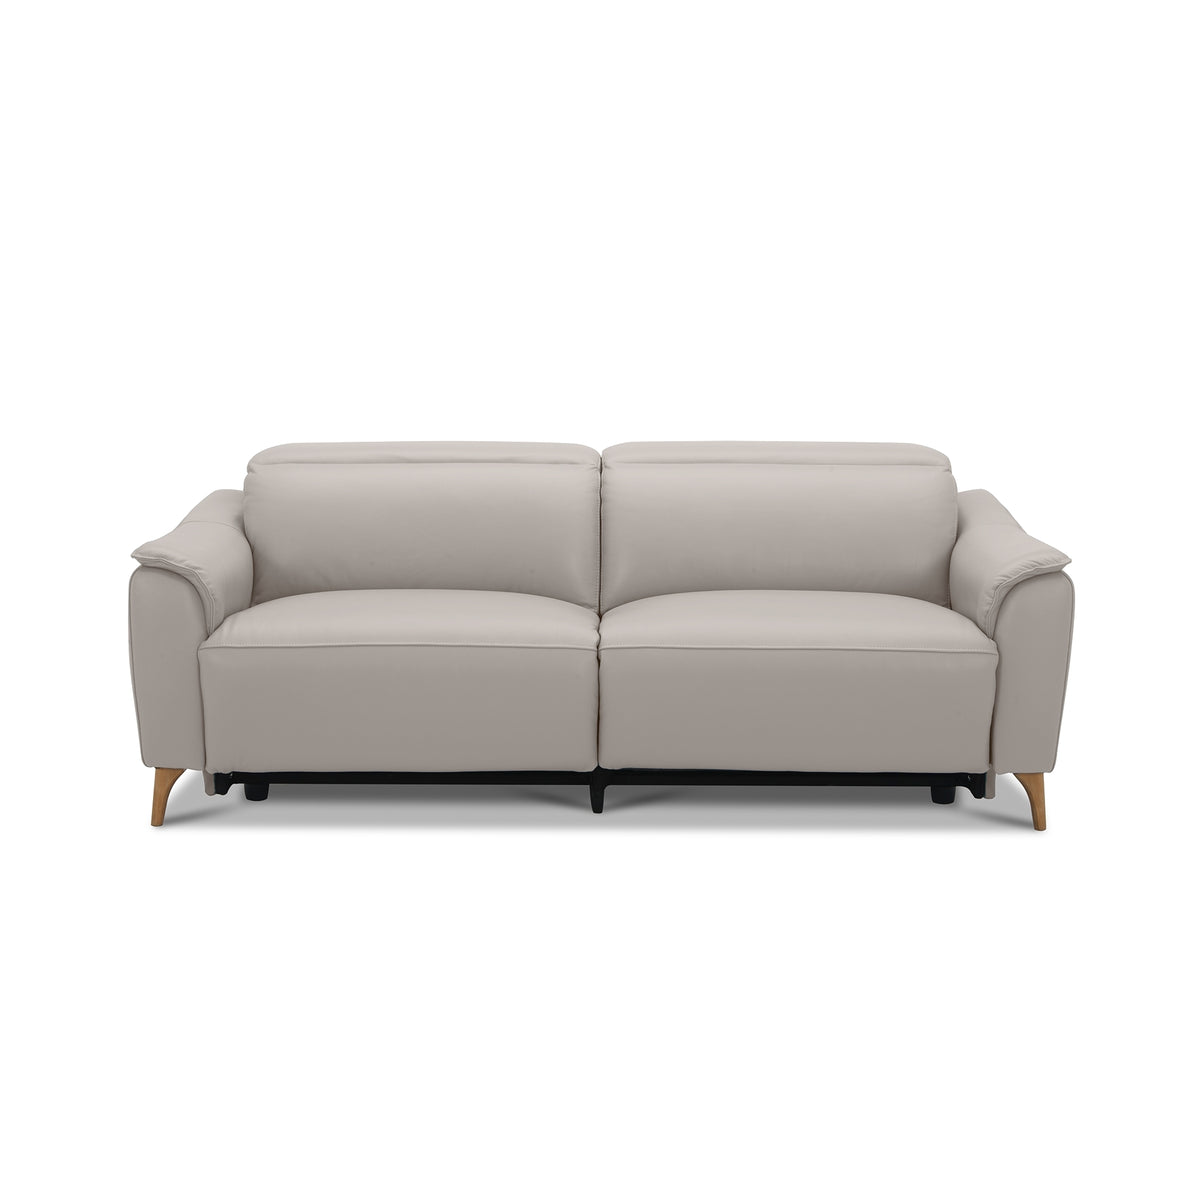 Inala 2.5 Seater Leather Electric Recliner Sofa Light Grey 